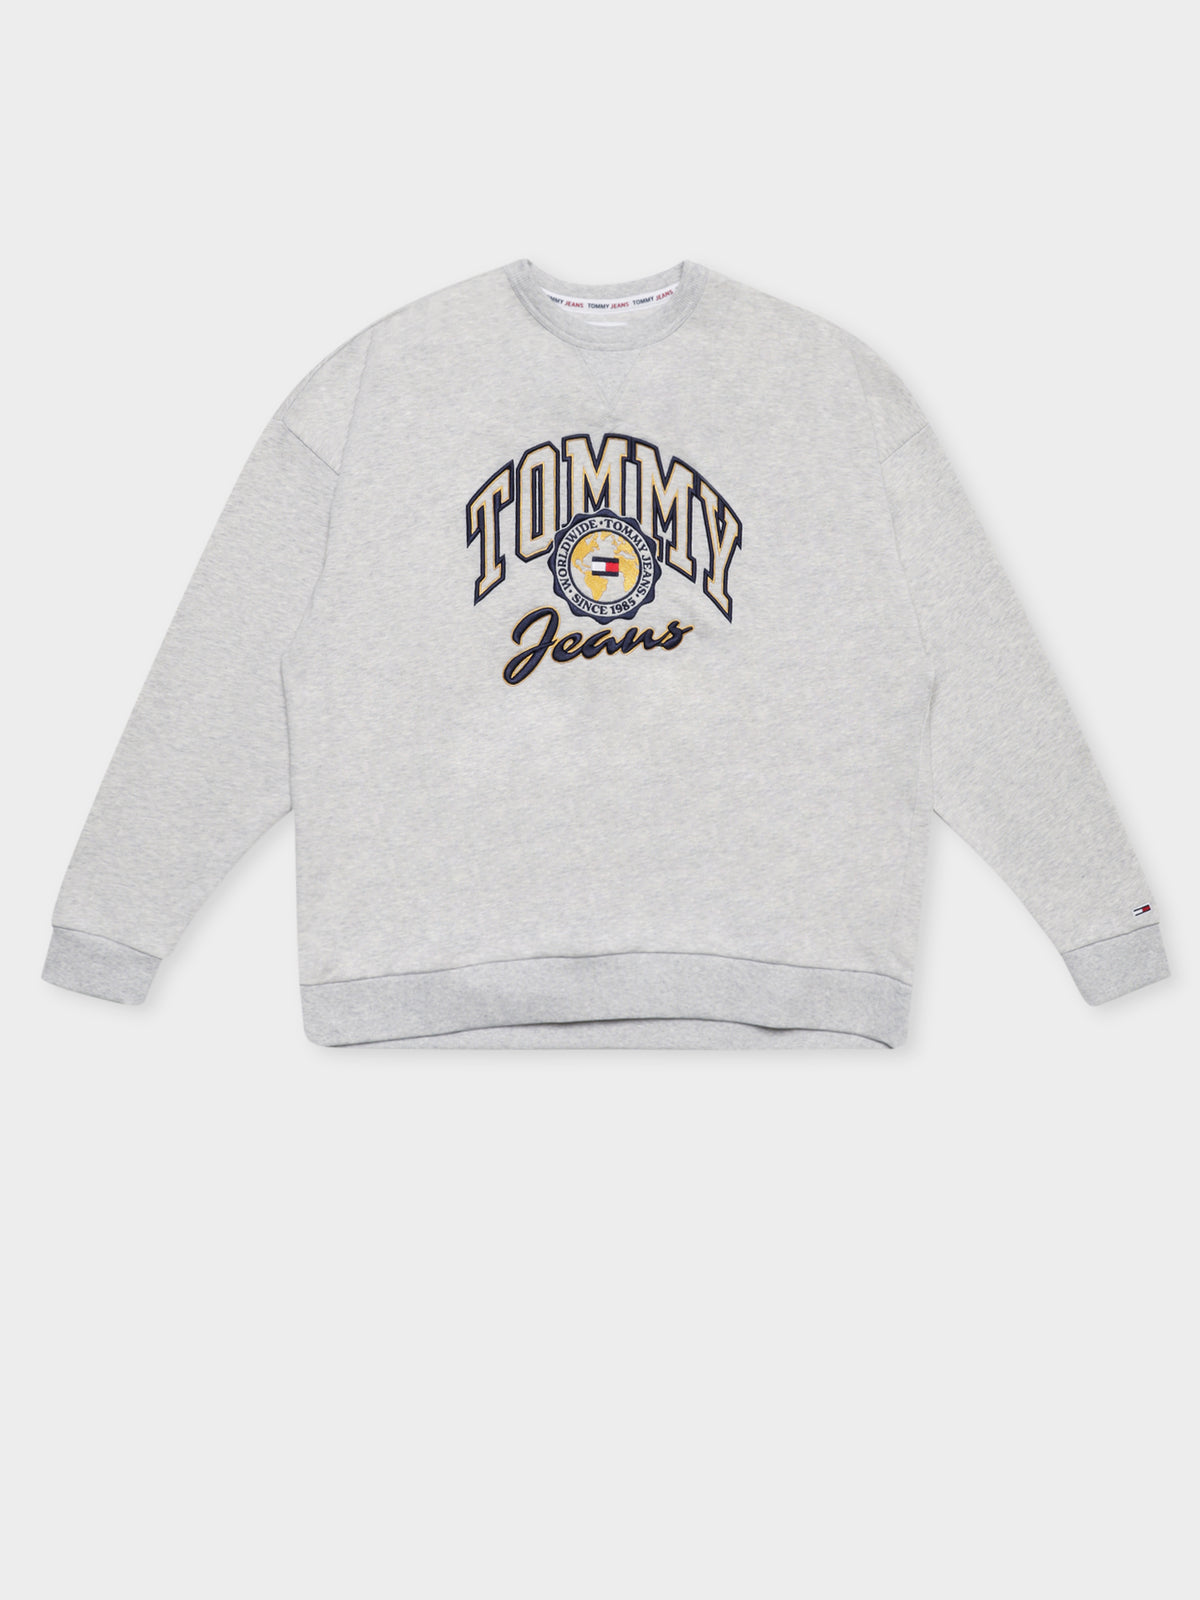 College Archive Crew in Silver Grey Heather